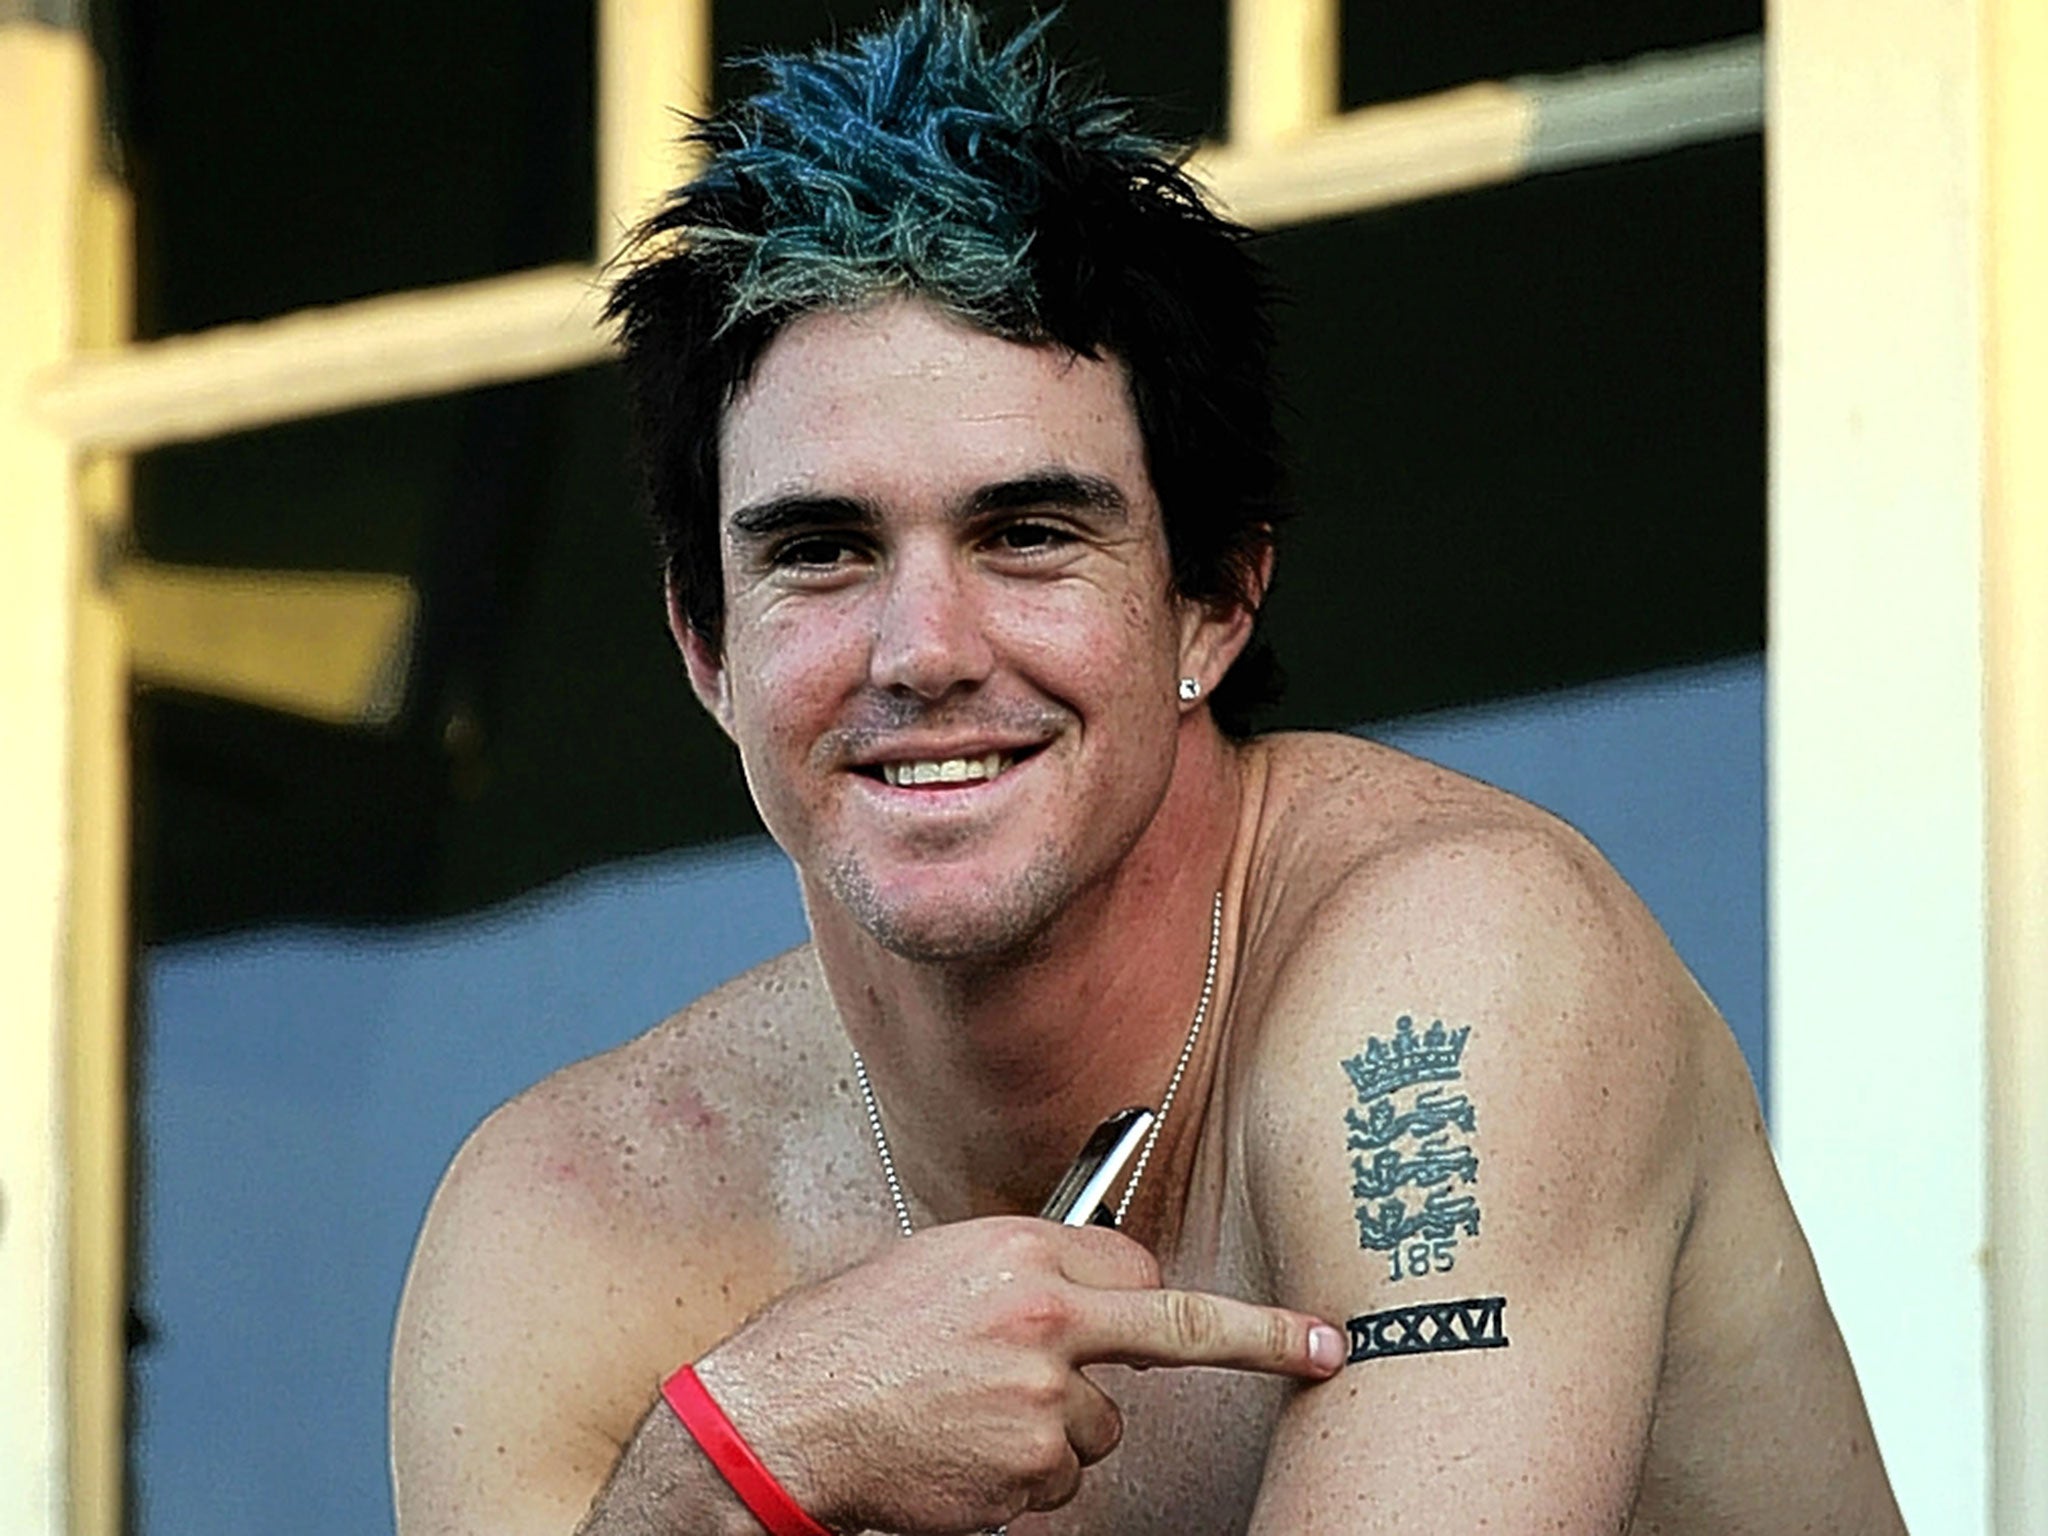 Kevin Pietersen displays the three lions tattoo he now blushes at